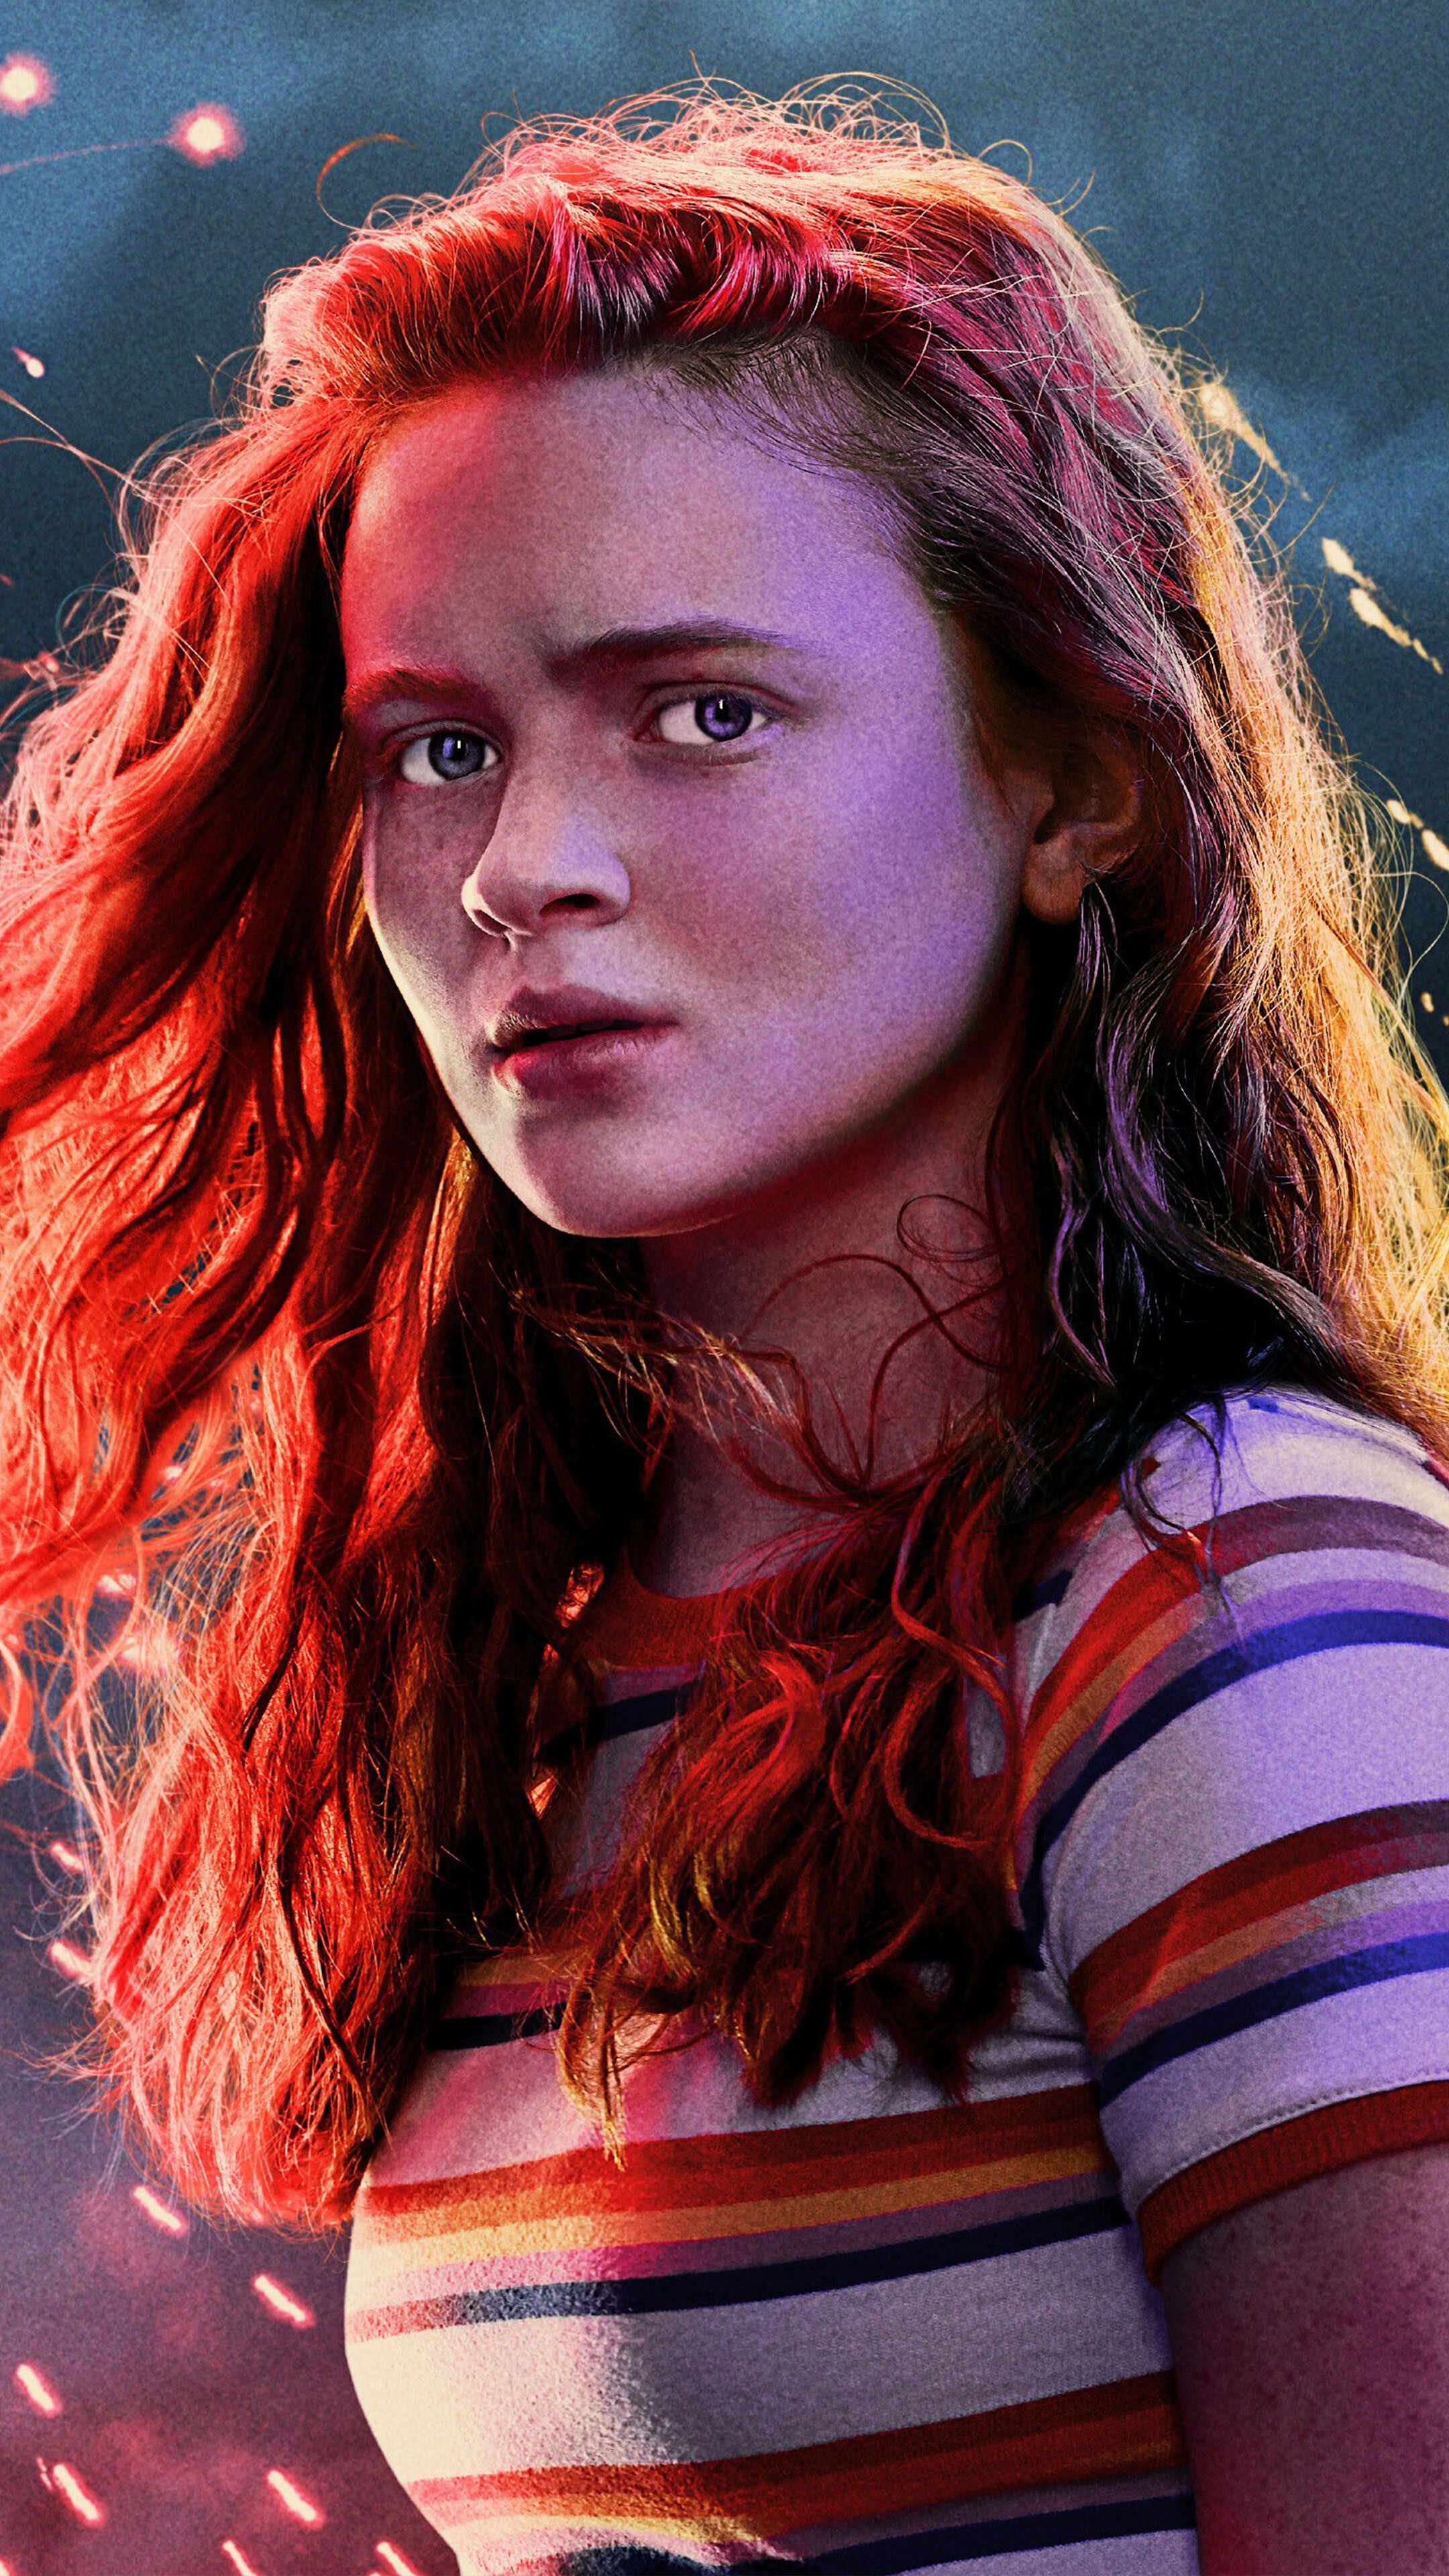 Stranger Things: Maxine "Max" Mayfield, Susan Hargrove's biological daughter. 2160x3840 4K Background.